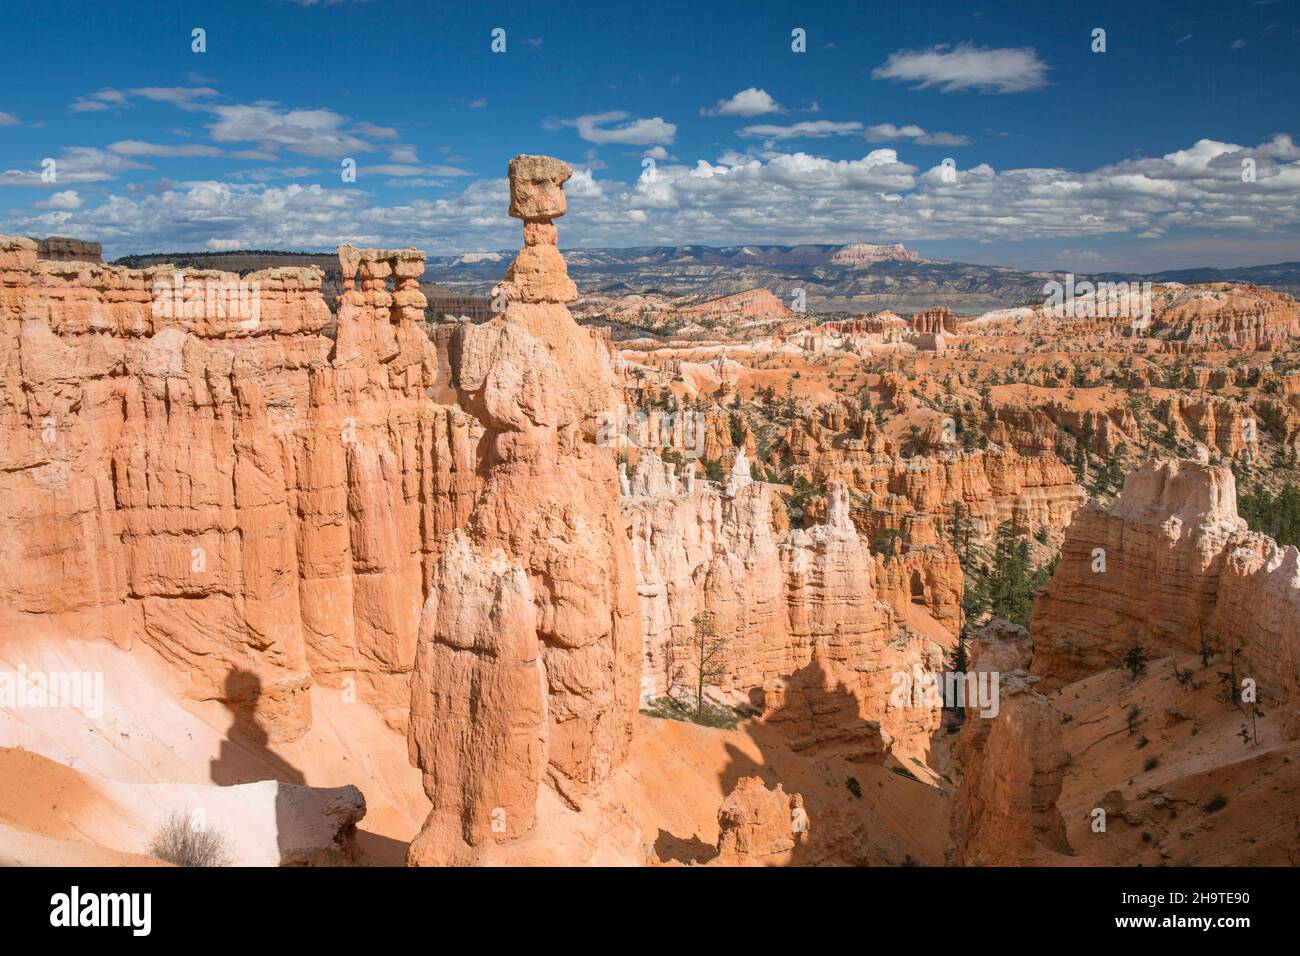 Bryce Canyon National Park, Utah, USA. View over the Queen's Garden from the Navajo Loop Trail below Sunset Point, Thor's Hammer prominent. Stock Photo